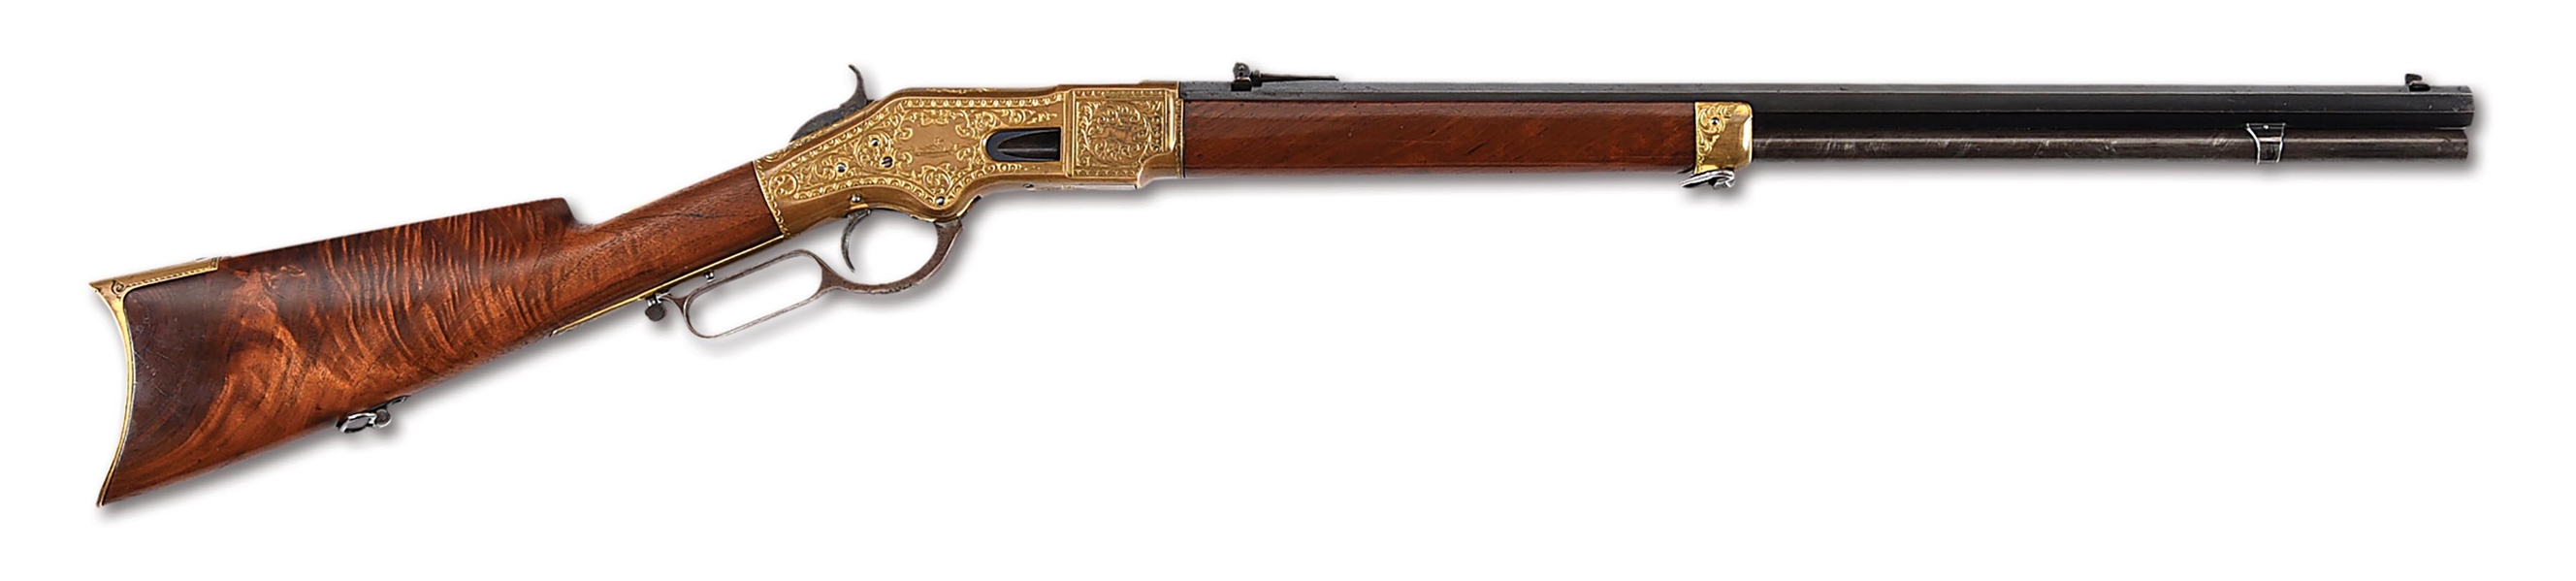 (A) HISTORIC ULRICH ENGRAVED WINCHESTER MODEL 1866 LEVER ACTION RIFLE INSCRIBED TO CHARLES DELONG.